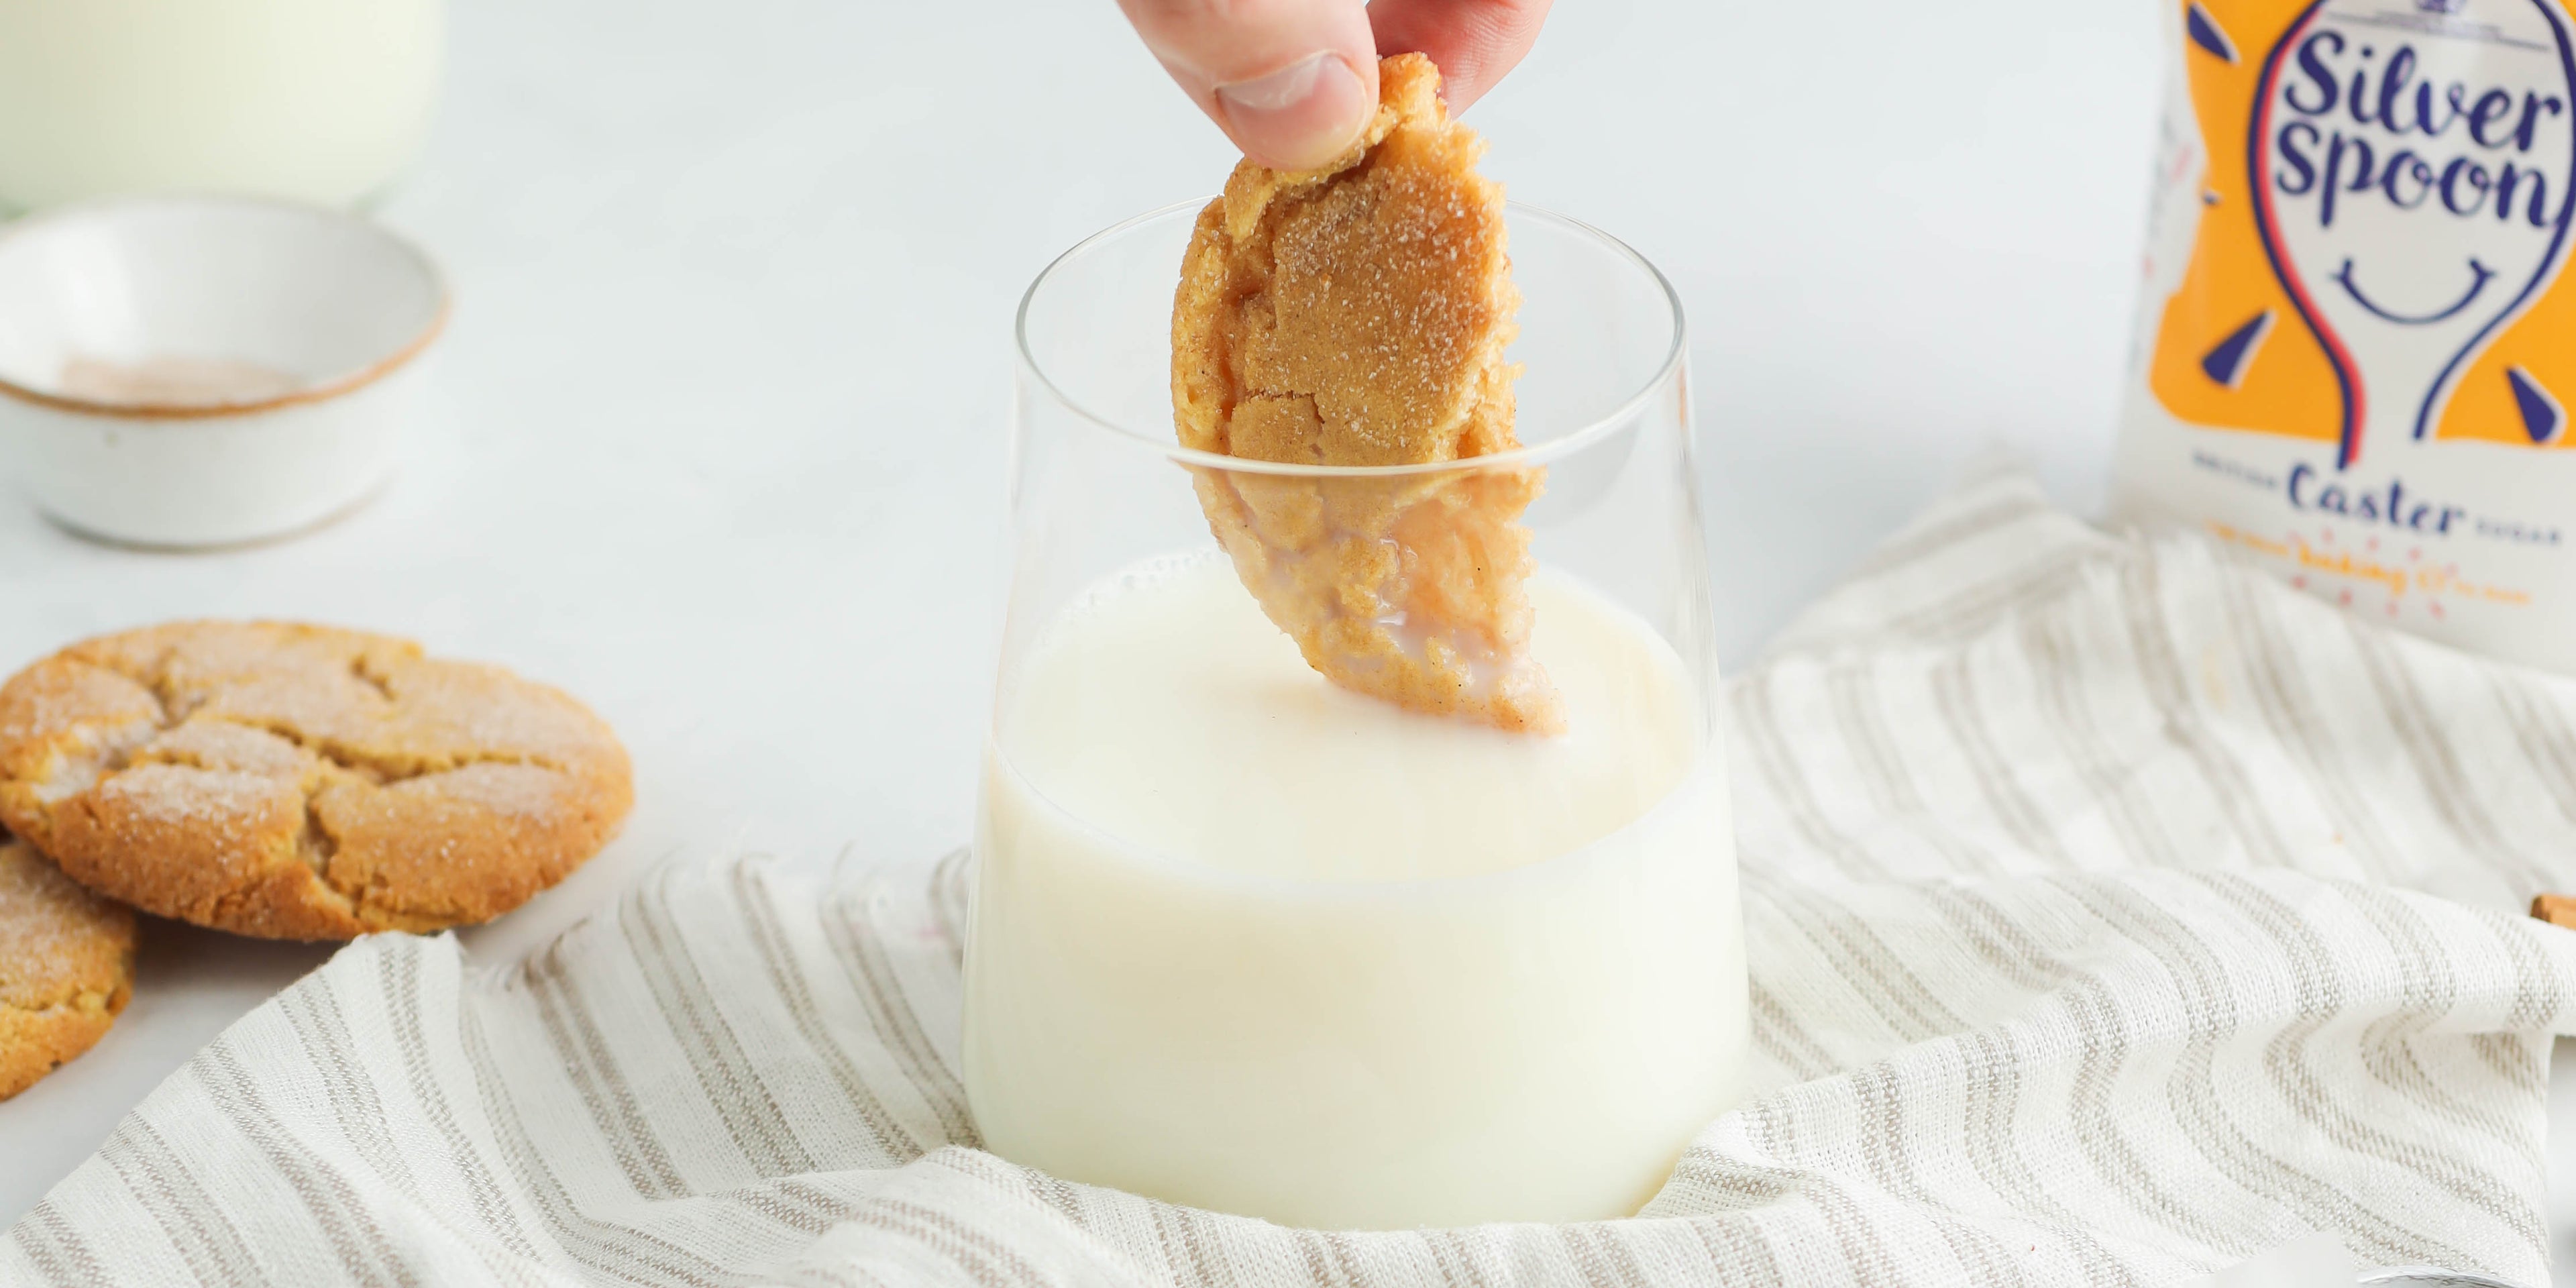 Close up of a Churro Cookies cut in half, being dunked into a glass of milk with a pack of Silver Spoon caster sugar in the background